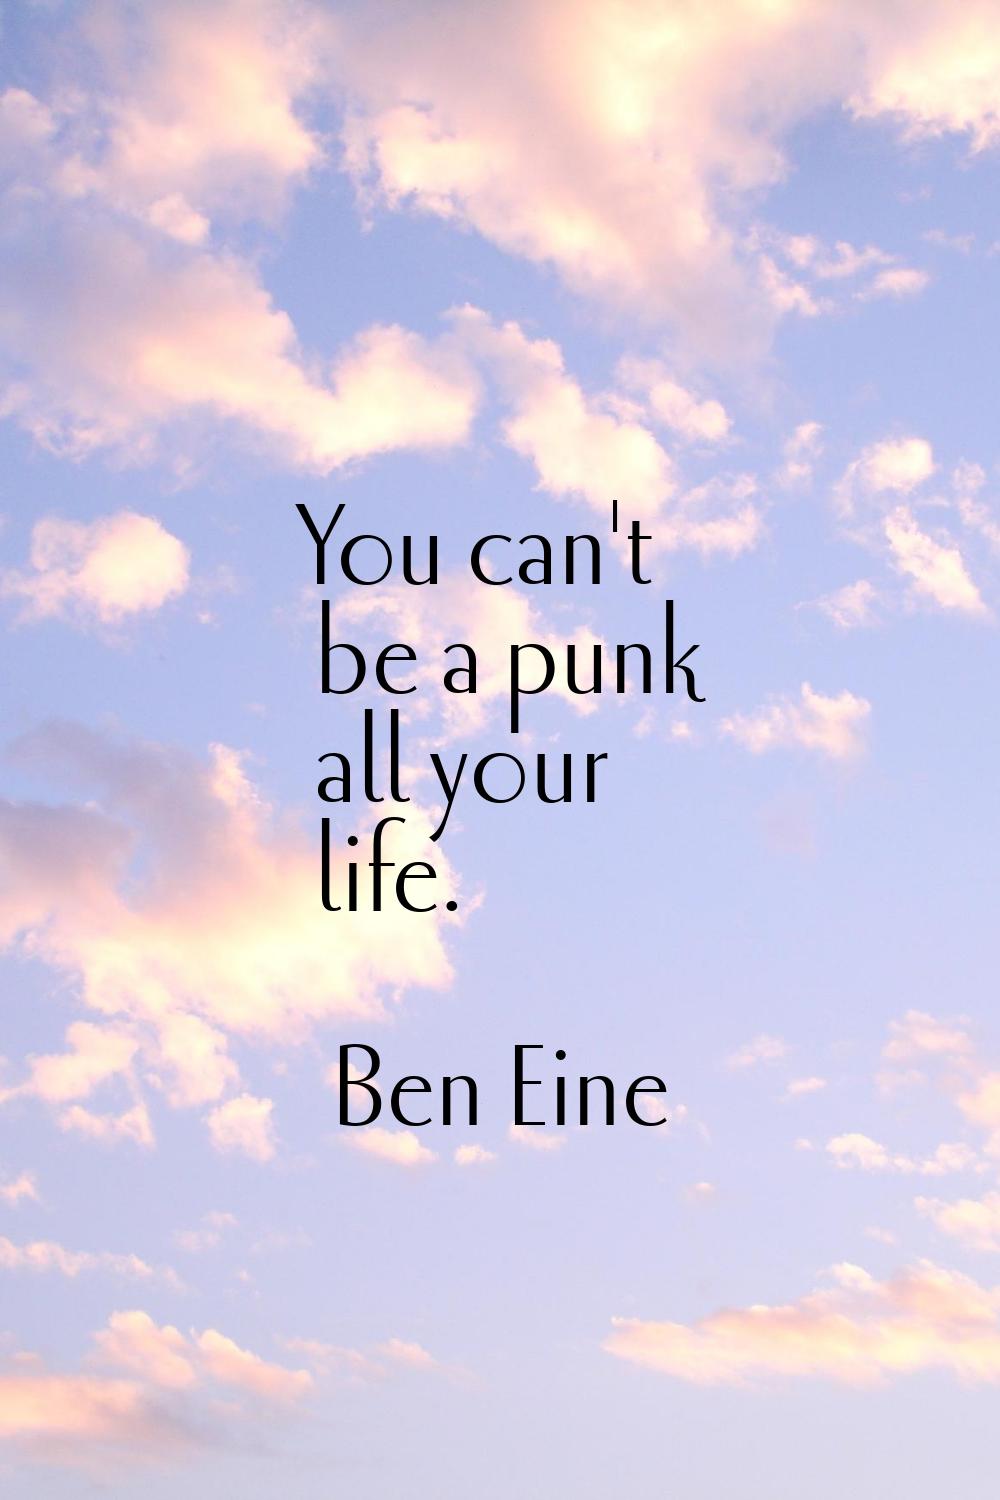 You can't be a punk all your life.